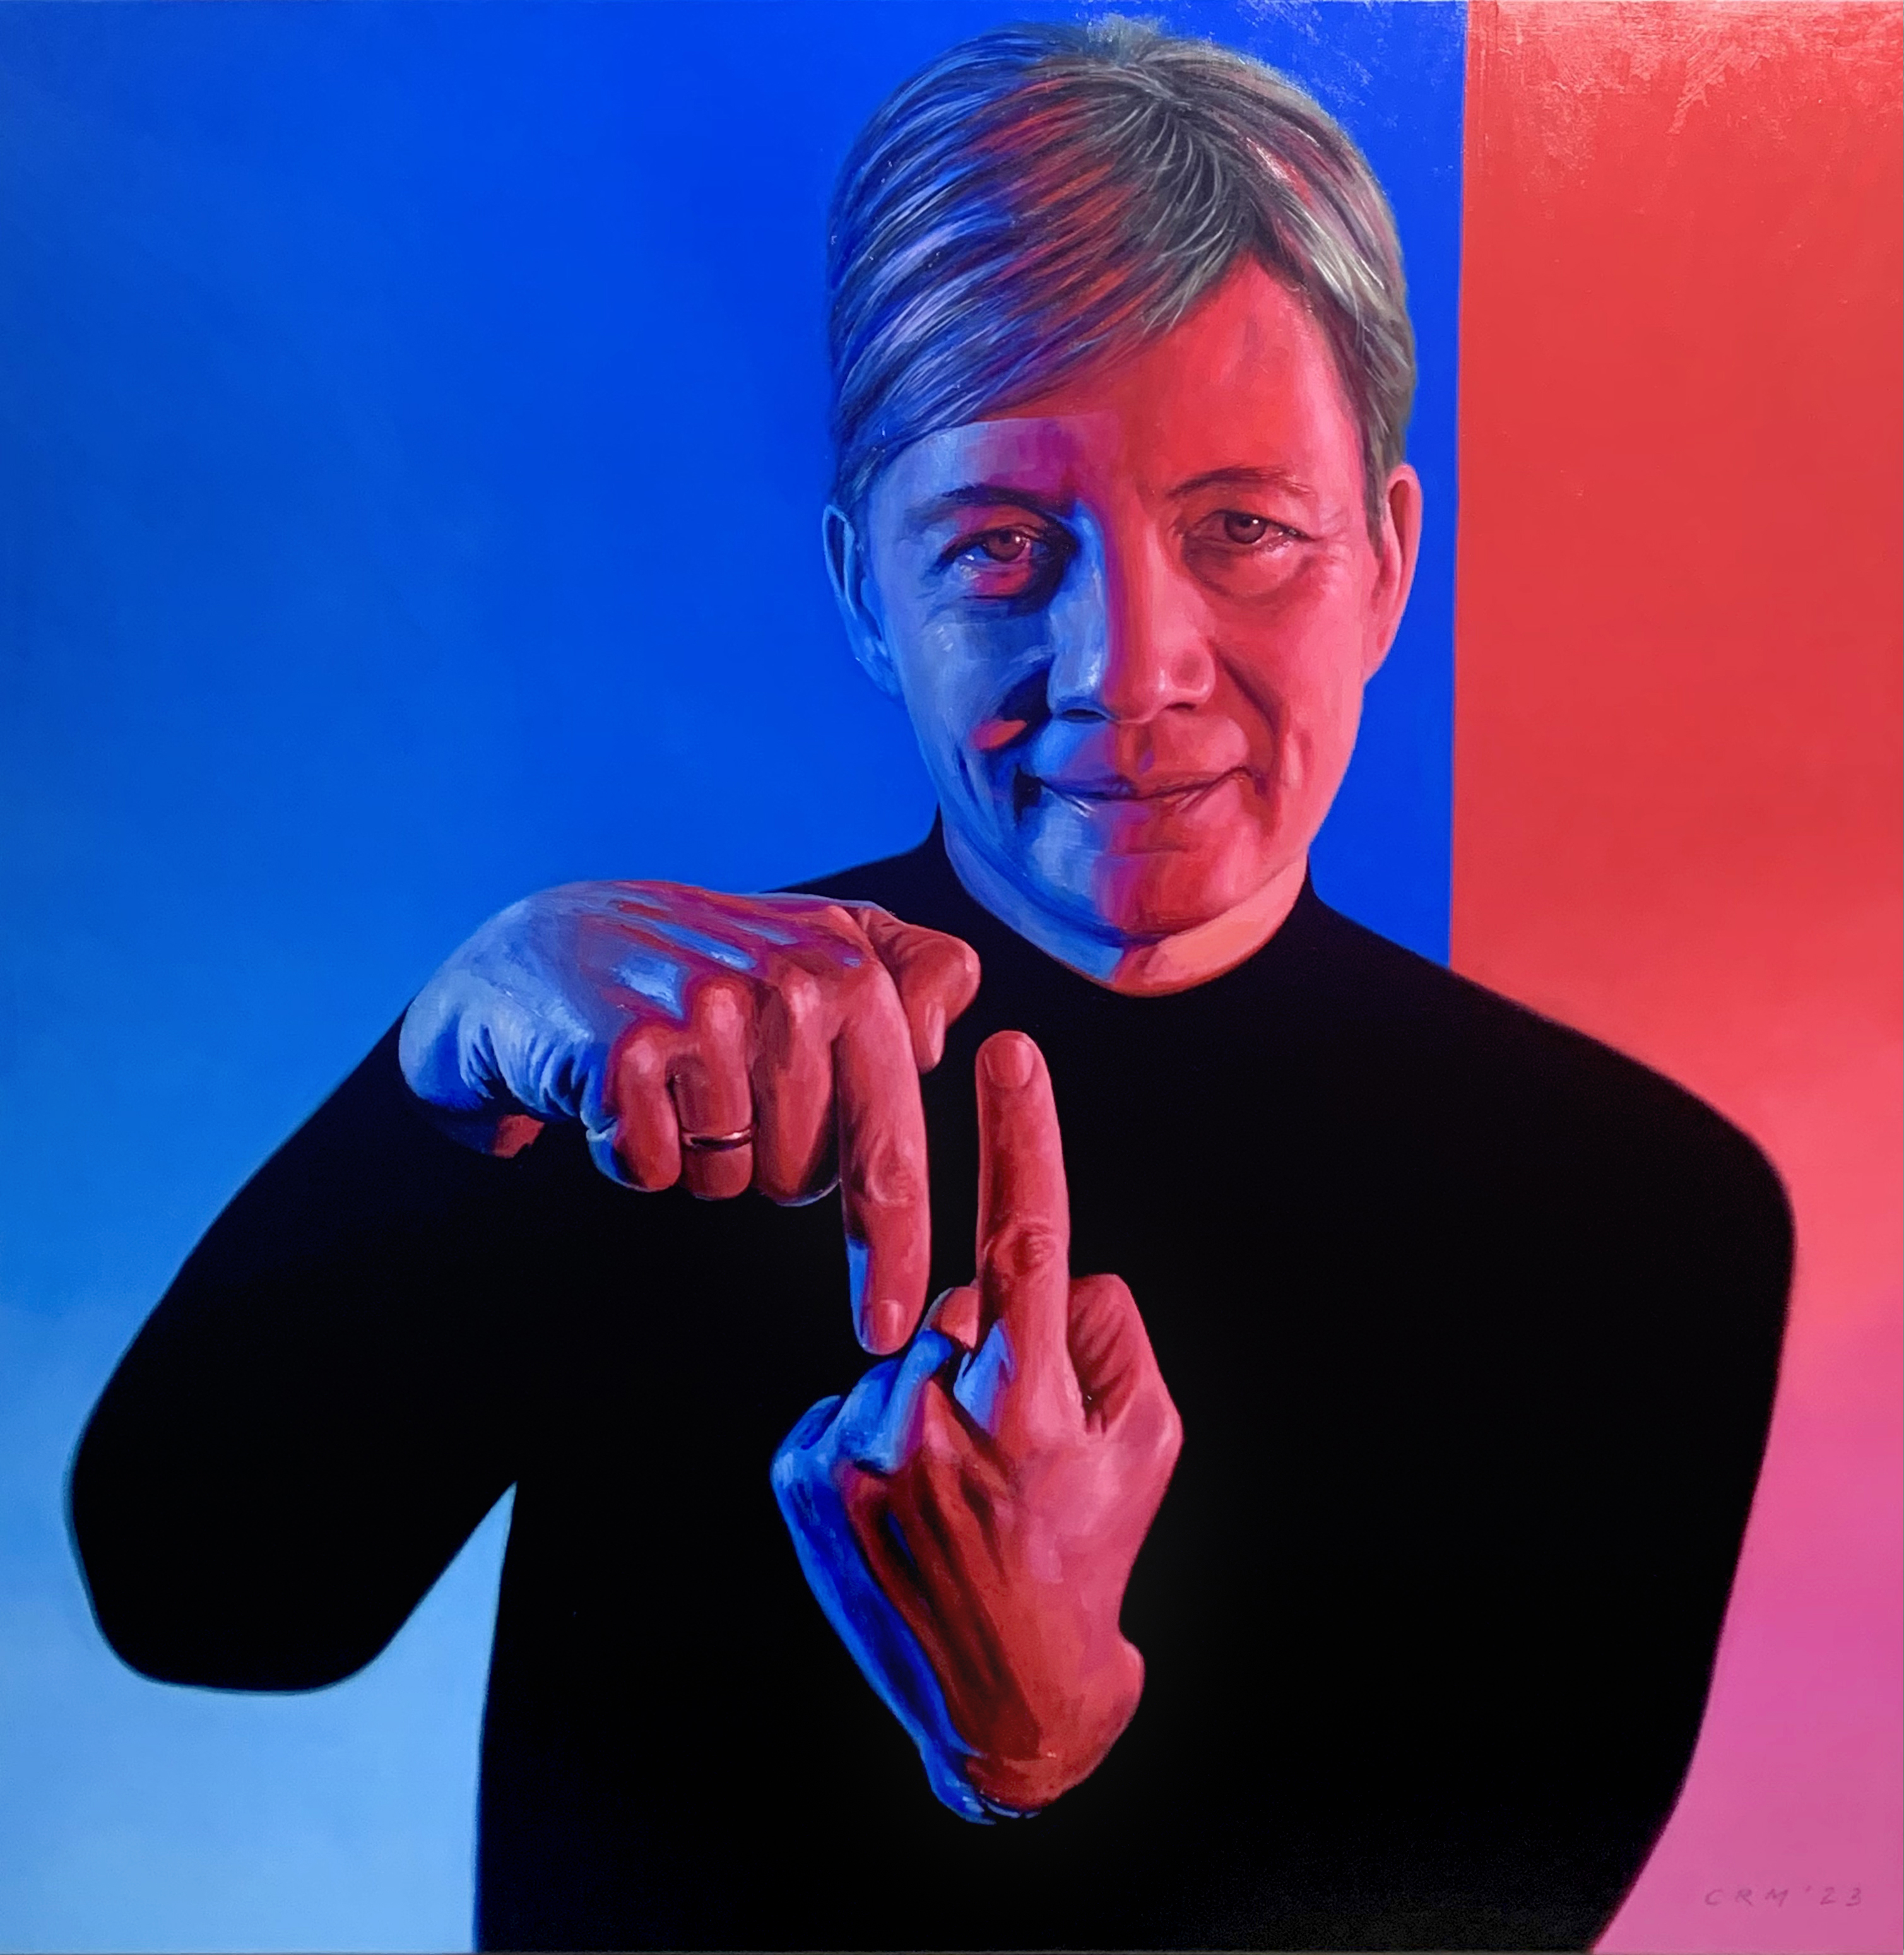 A portrait of Michelle Simmons. She is pointing one index finger up and the other index finger down